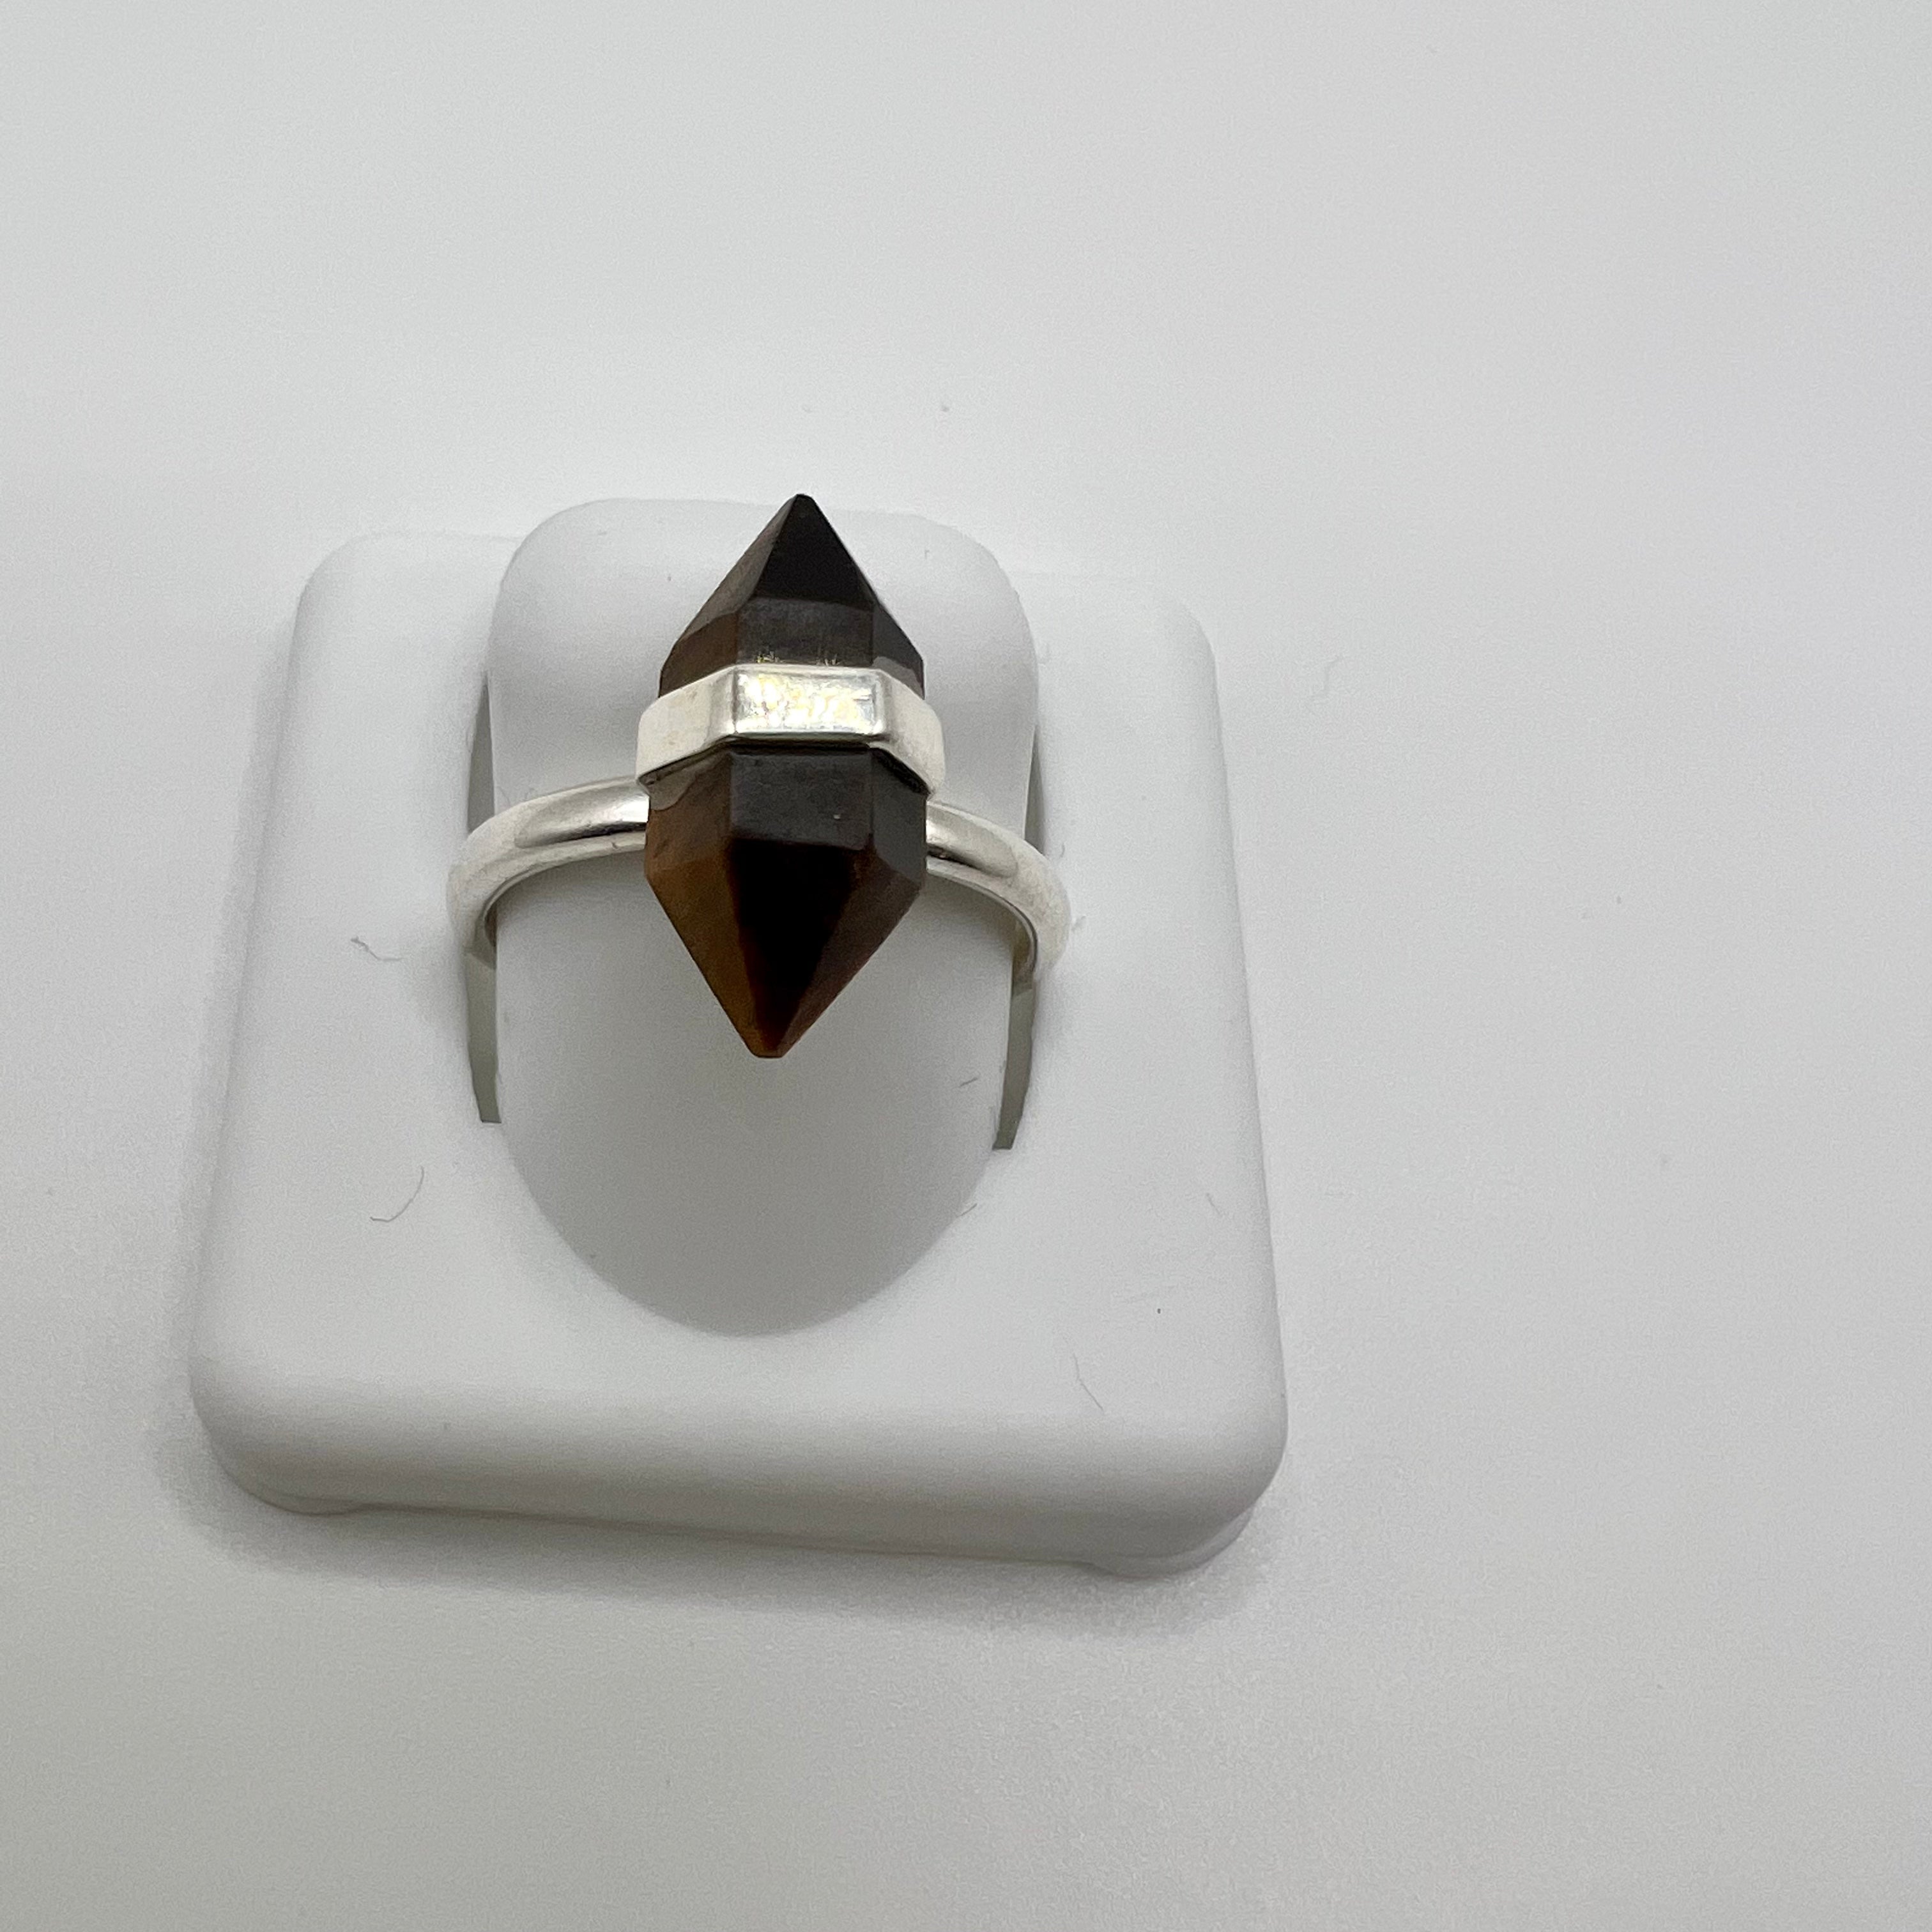 Tigers Eye Shaped Stone Sterling Silver Ring